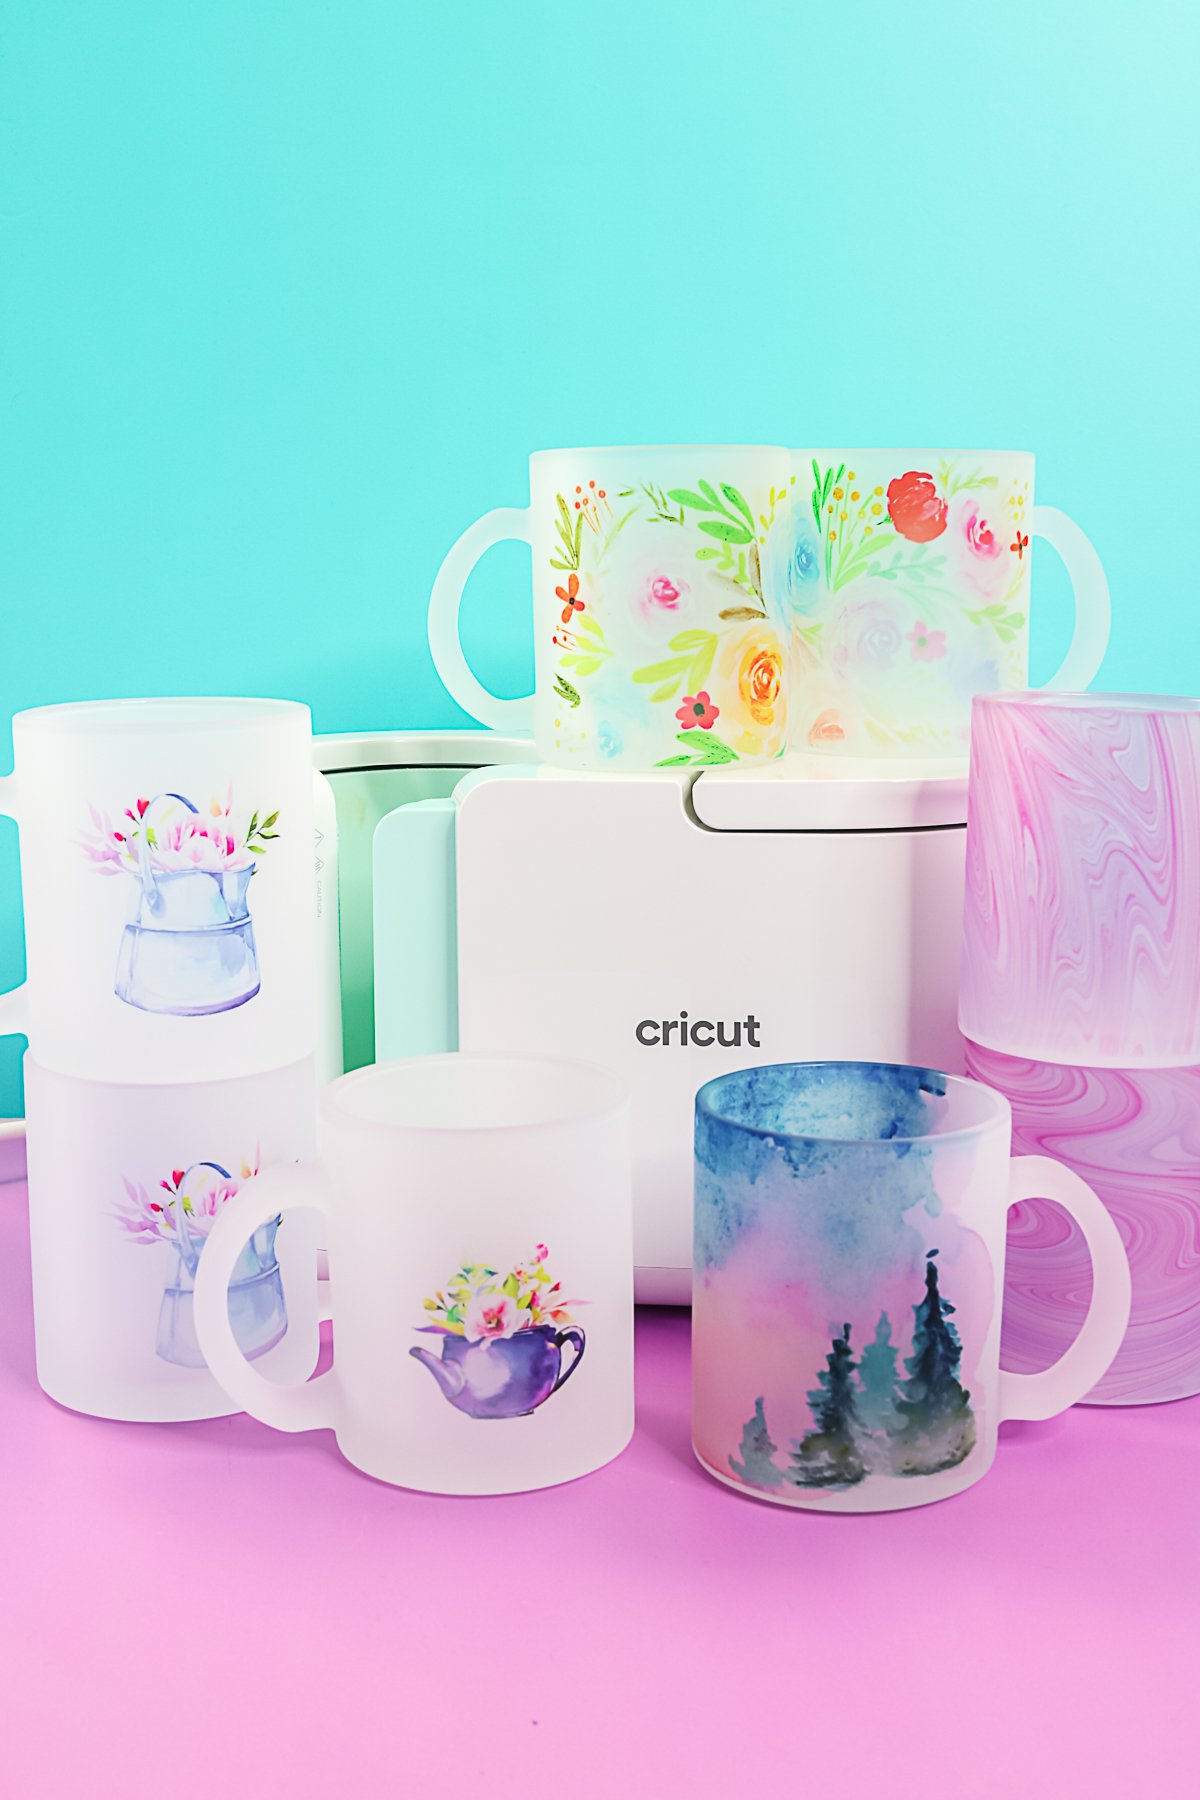 How to customize a glass mug in 10 minutes with a Cricut machine